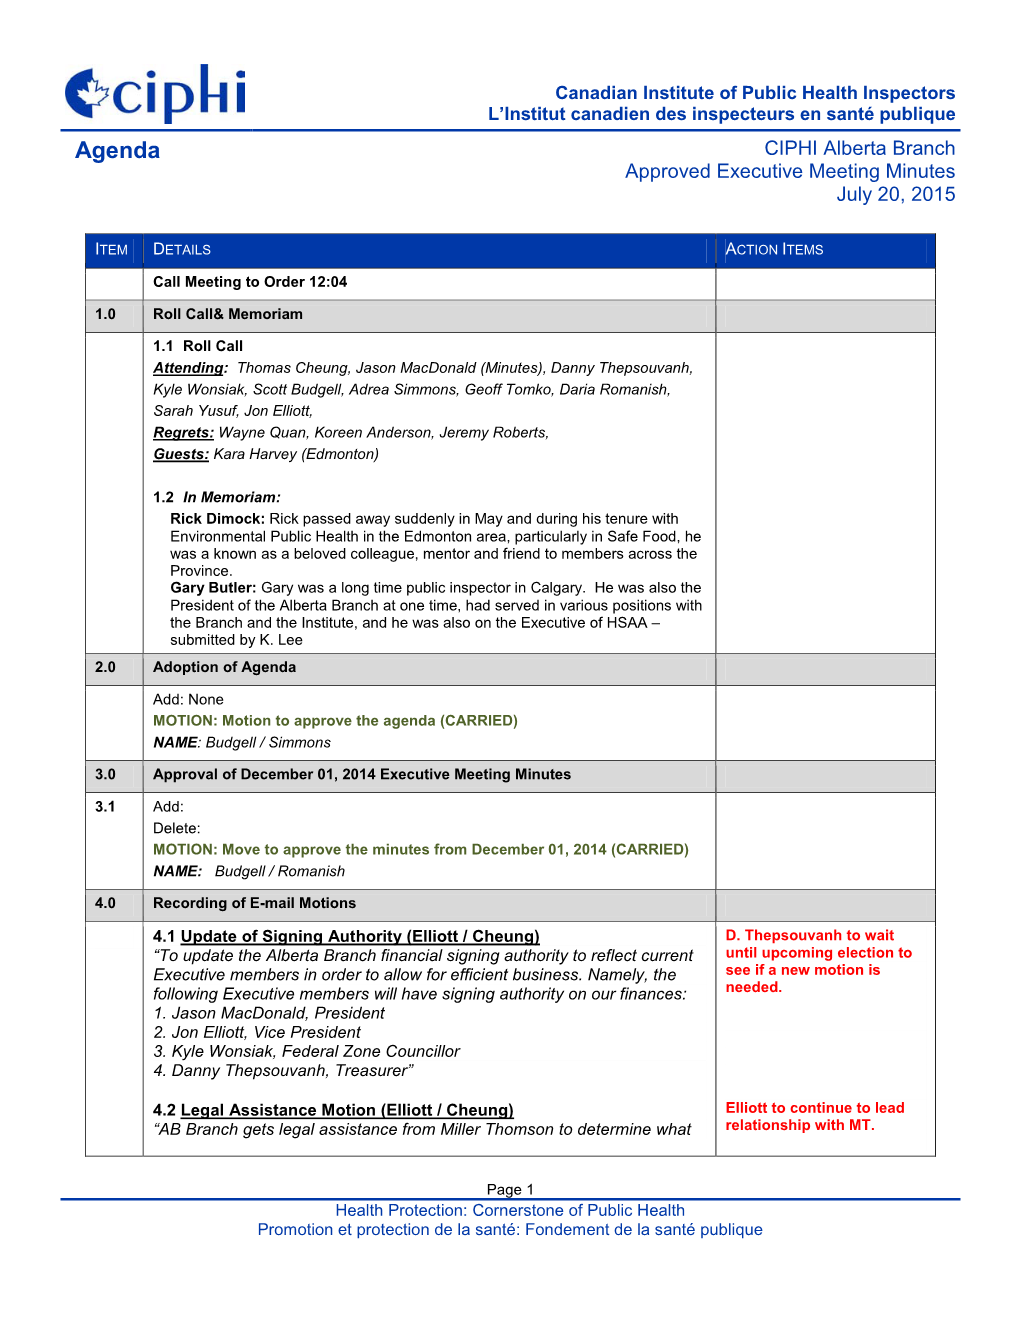 Agenda CIPHI Alberta Branch Approved Executive Meeting Minutes July 20, 2015